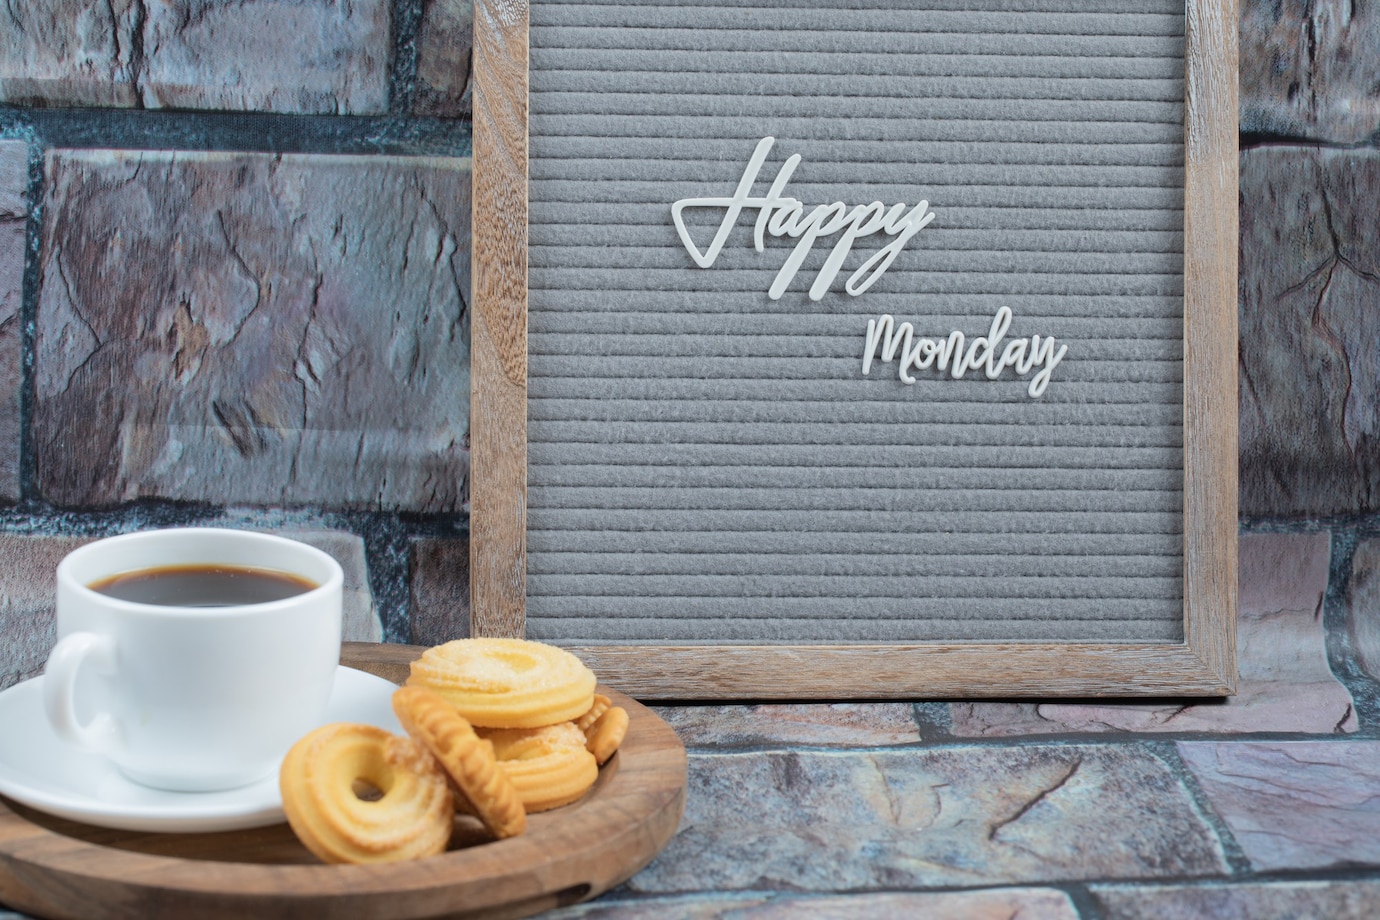 happy-monday-poster-with-cup-drink-cookies-around_114579-45108.jpg